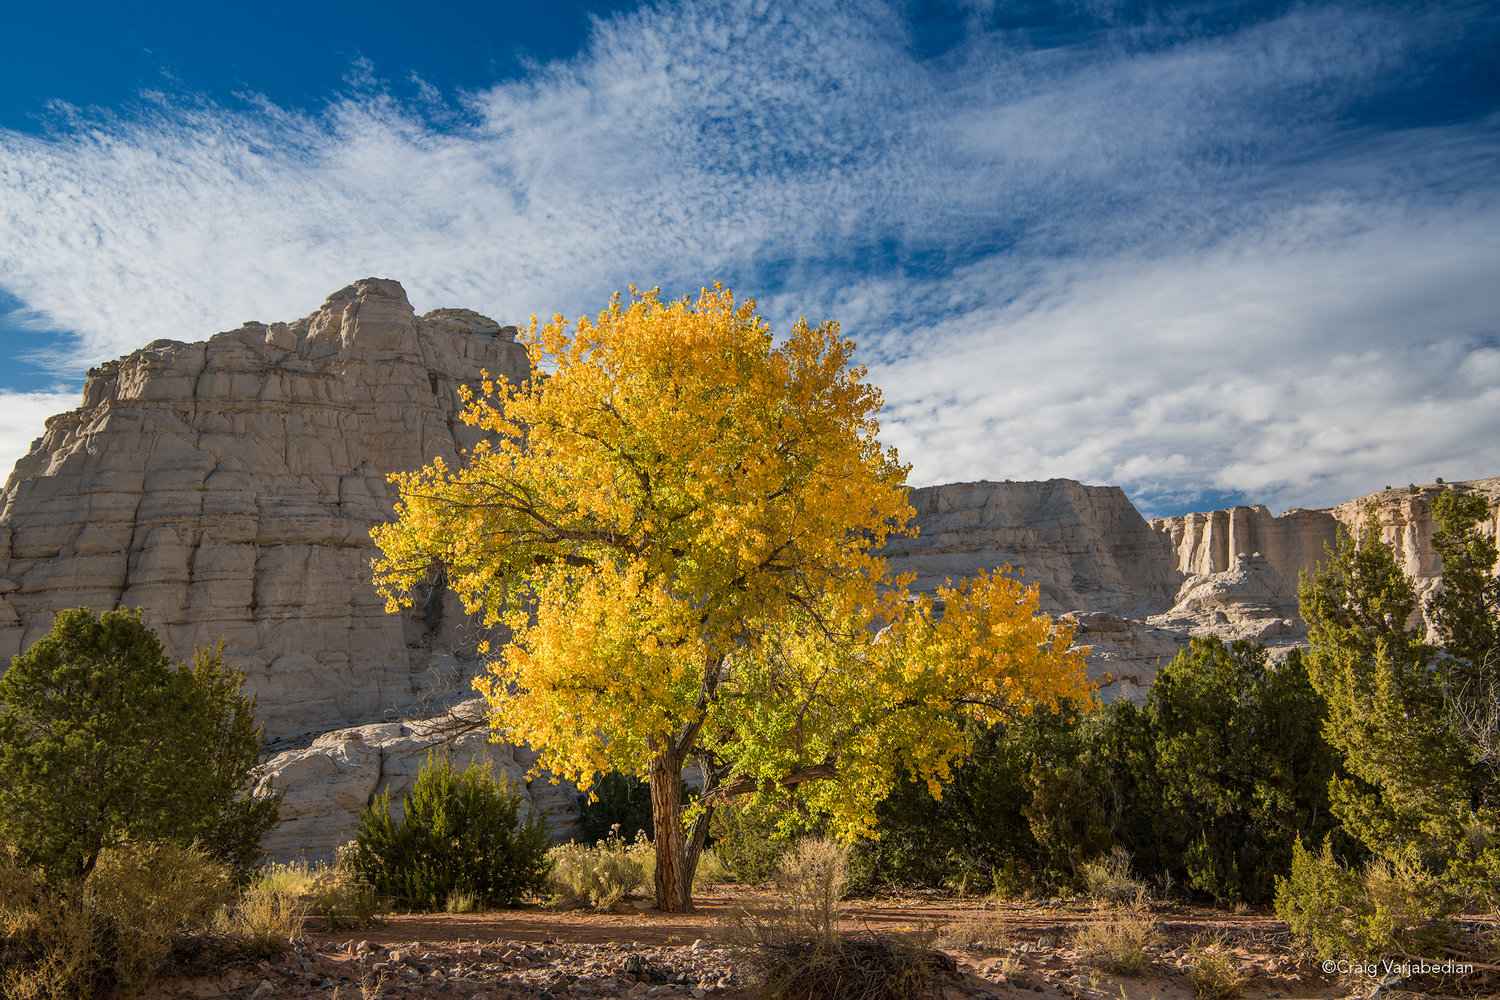 Falling for New Mexico Photo Workshop, Santa Fe, New Mexico, United States